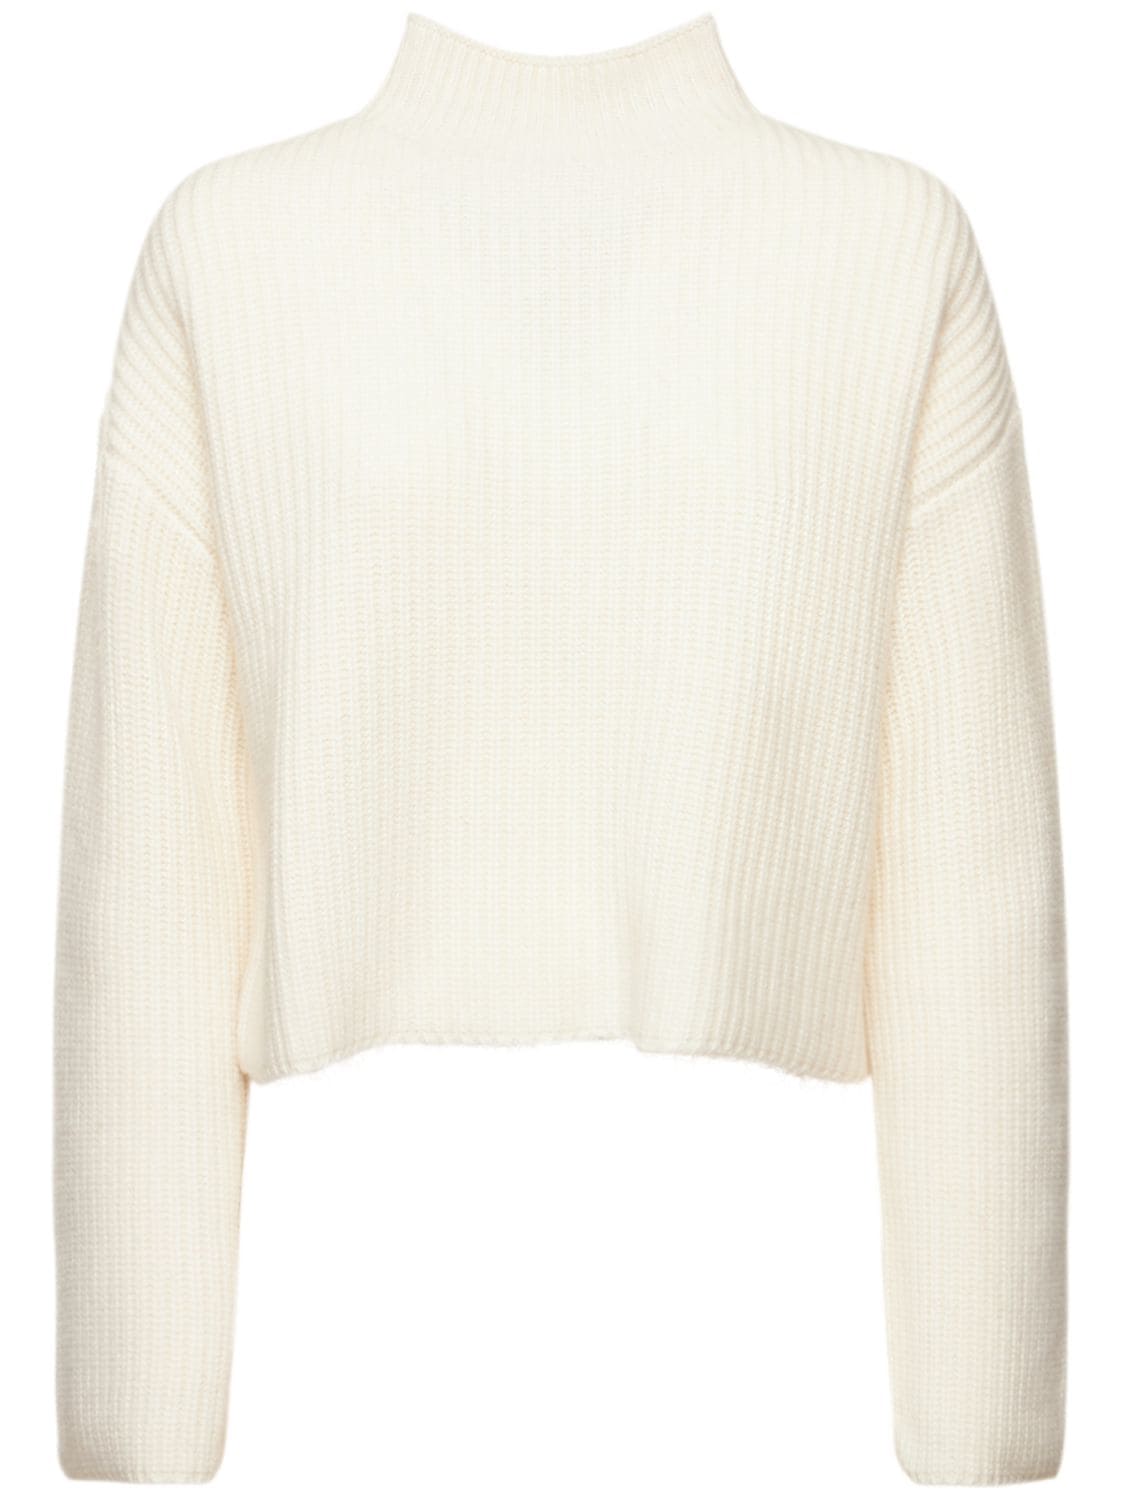 Loulou Studio Faro High Neck Cashmere Sweater In Ivory